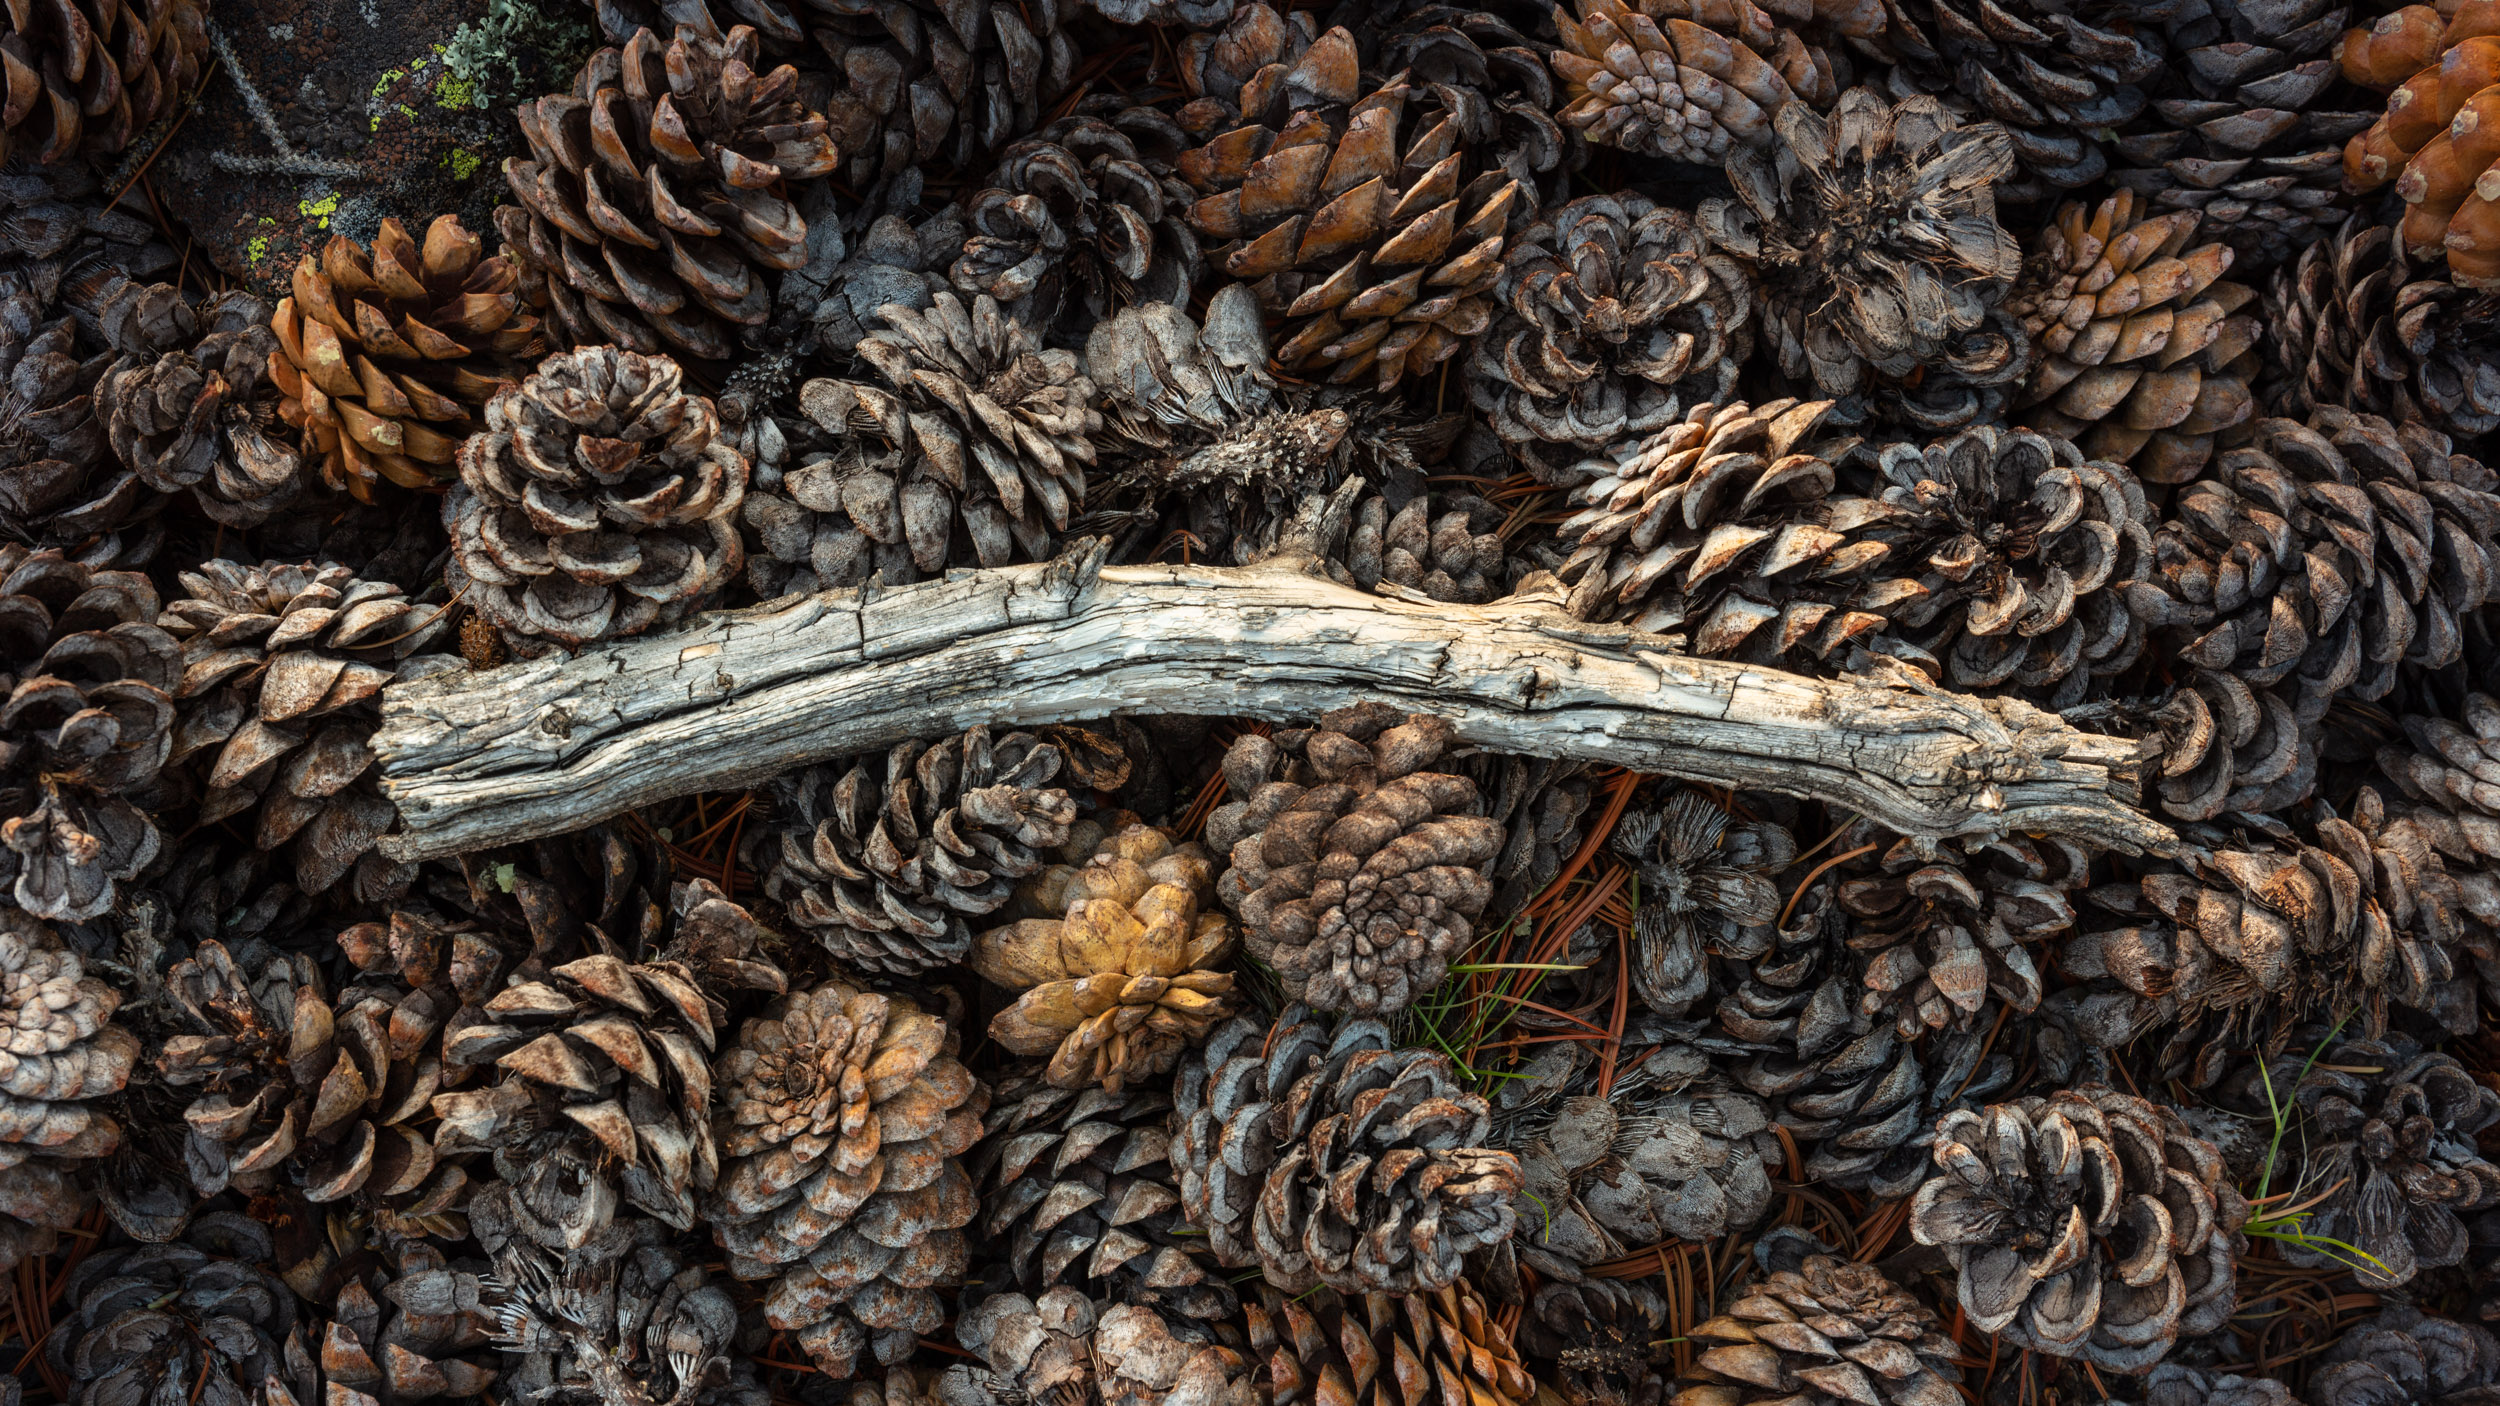 Under the gentle embrace of Rocky Mountain National Park's morning glow, a weathered stick rests atop a bed of pinecones. Delicate...